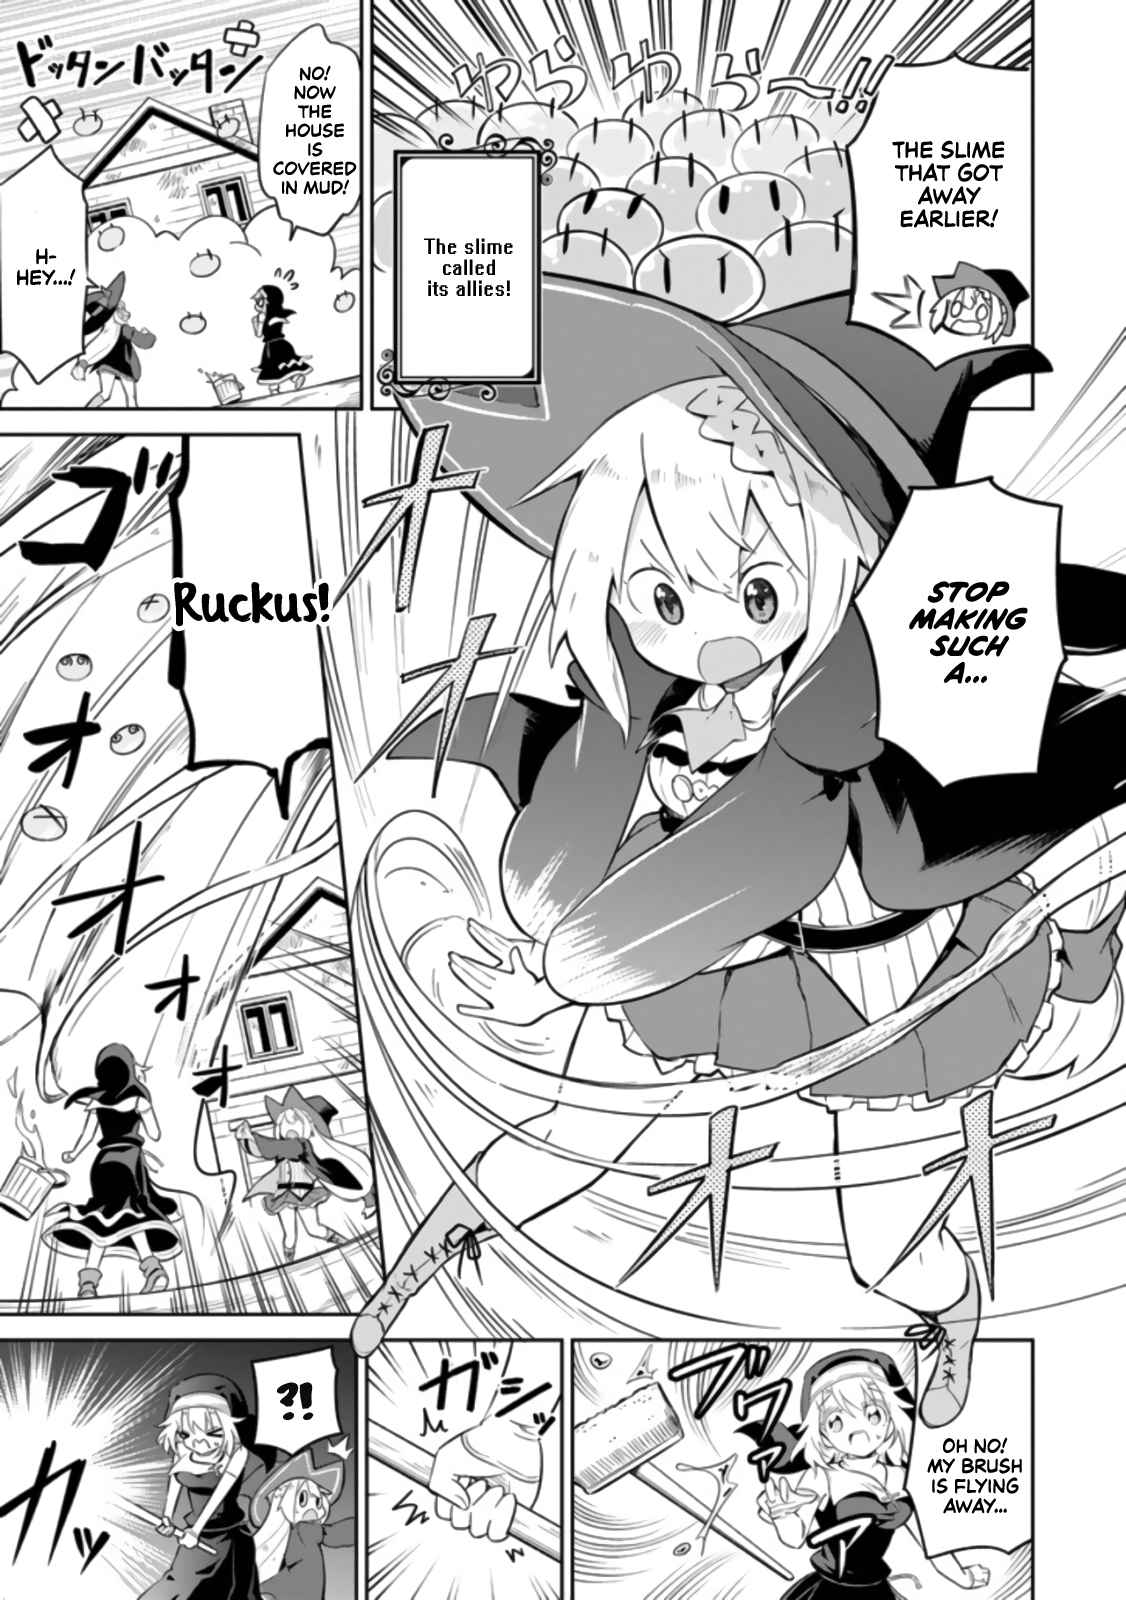 Slime Taoshite 300 nen, Shiranai Uchi ni Level MAX ni Nattemashita Ch. 22.99 The Story of a Level 99 Witch and a Sister who loves cleaning ( Special Collab Chapter )